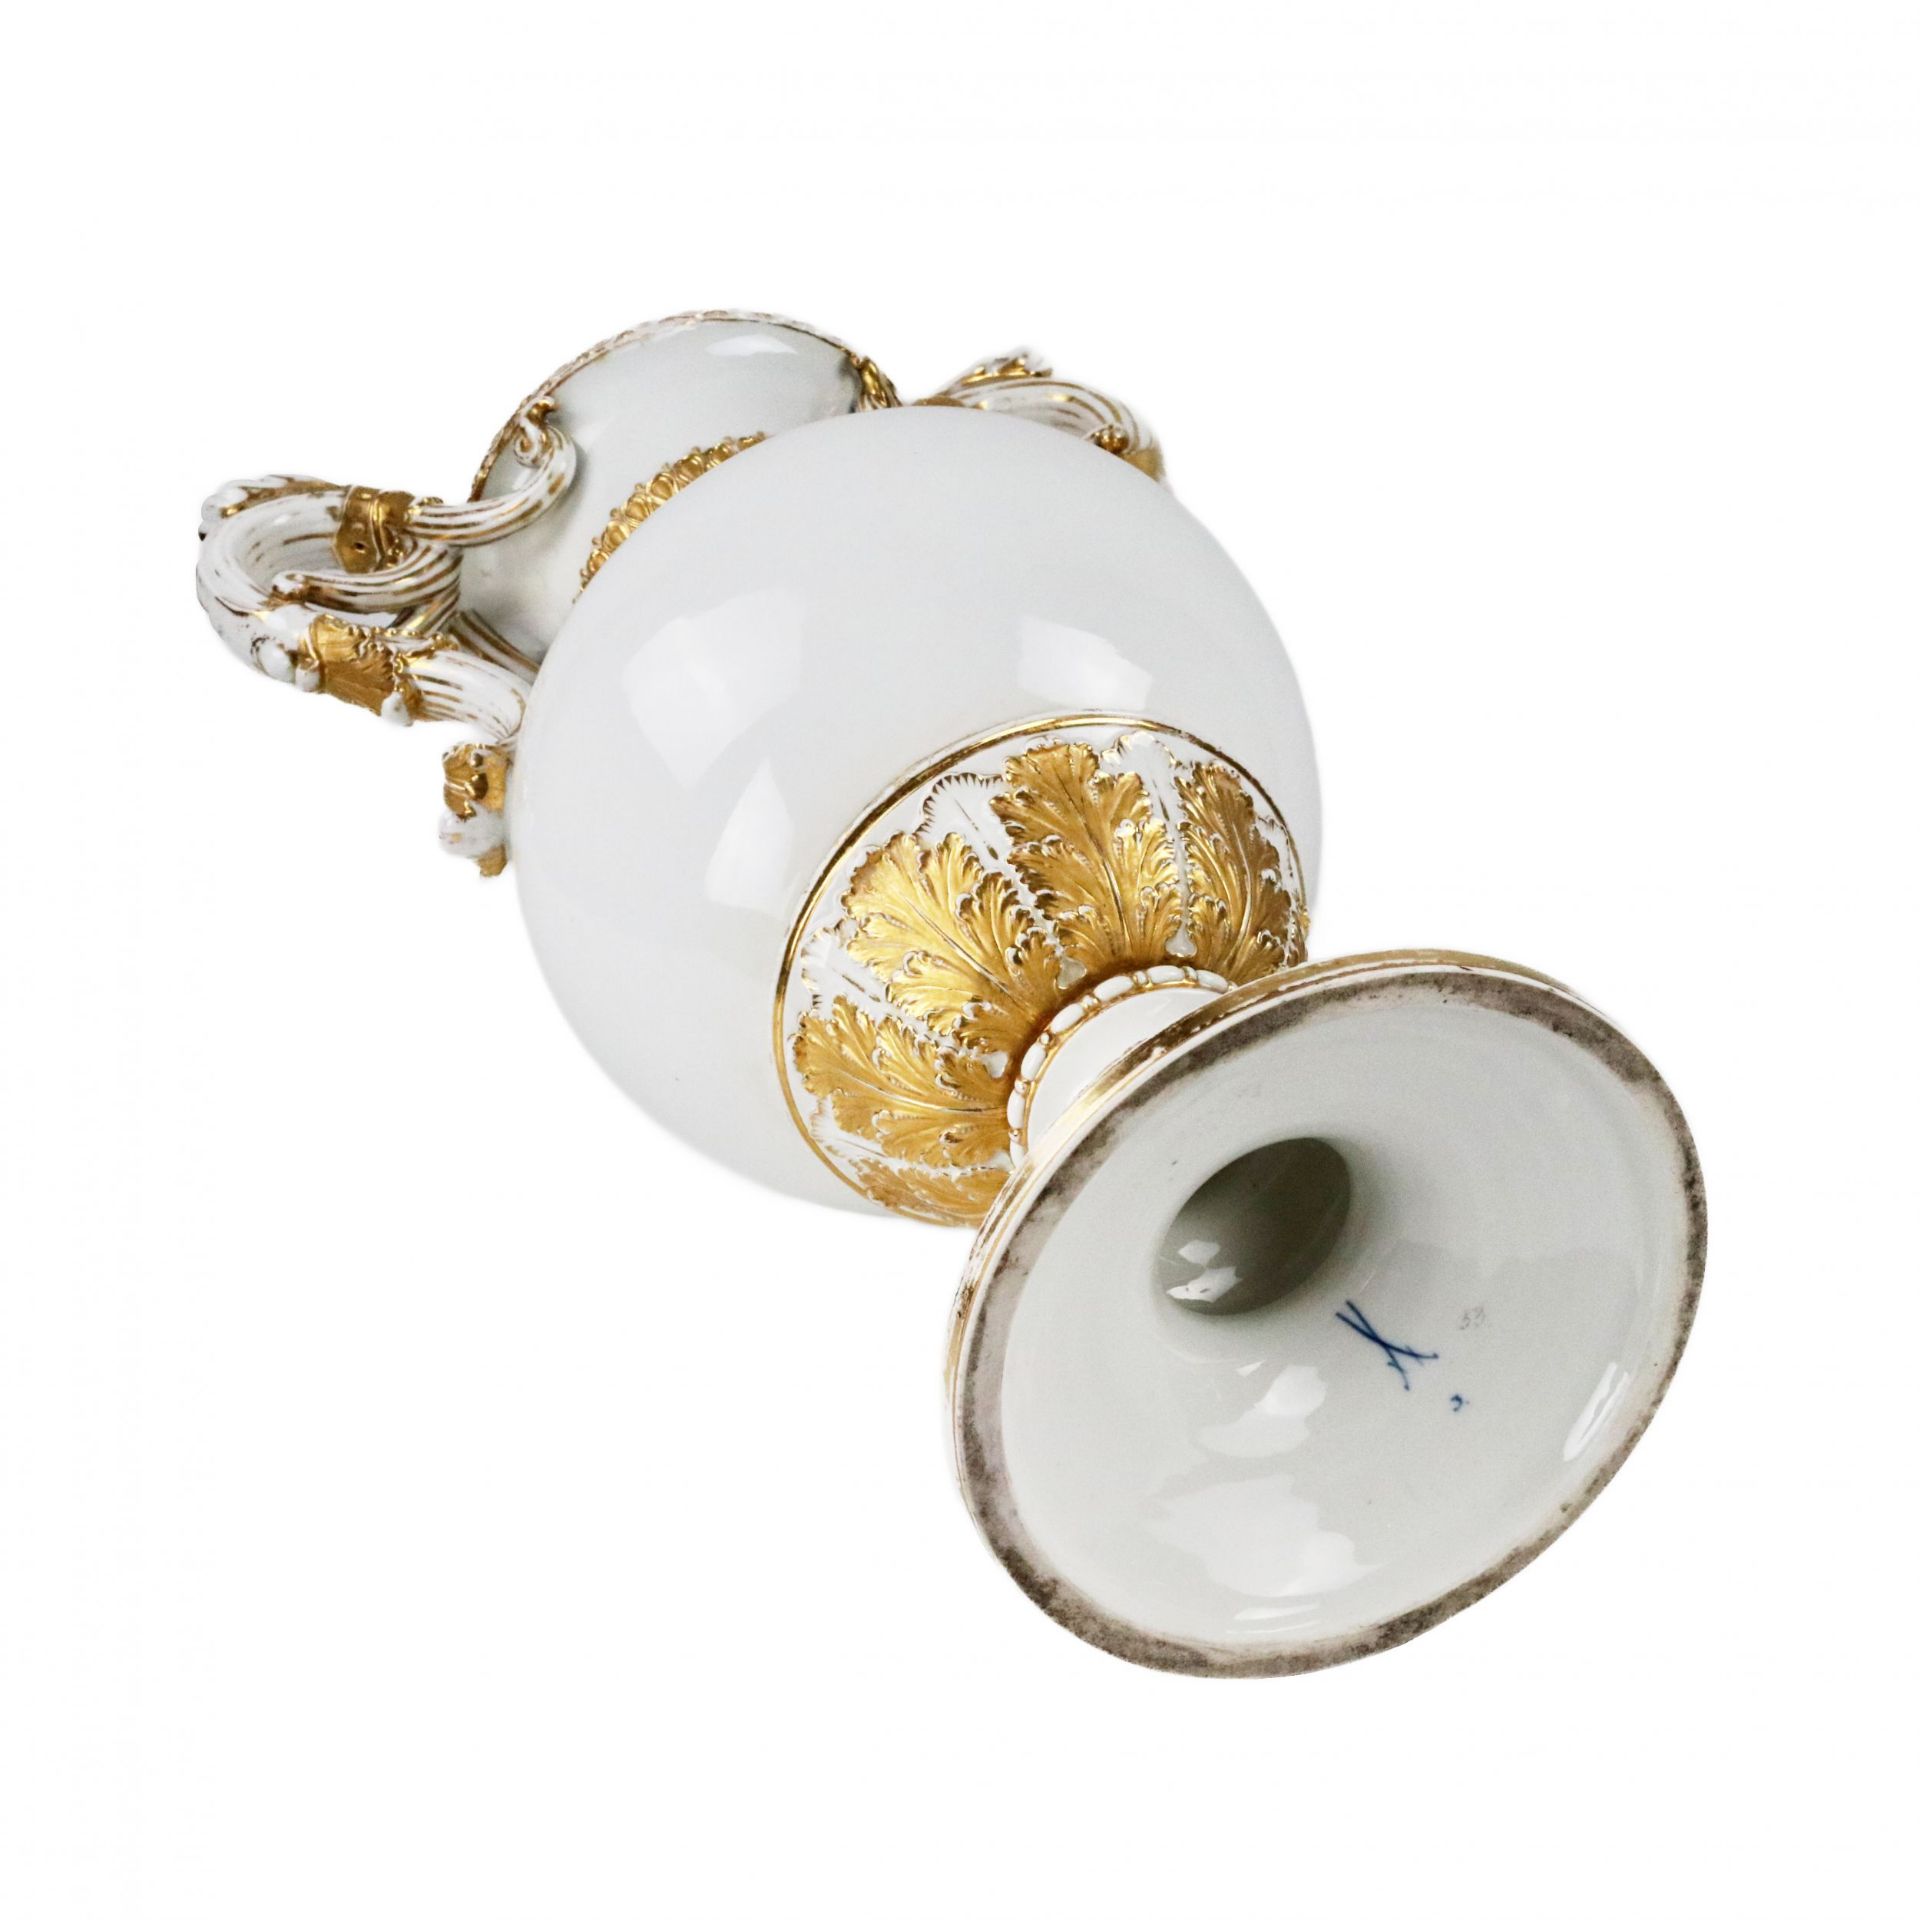 Pair of large Meissen porcelain vases with decoration in gold on white, Napoleon III style. - Image 6 of 8